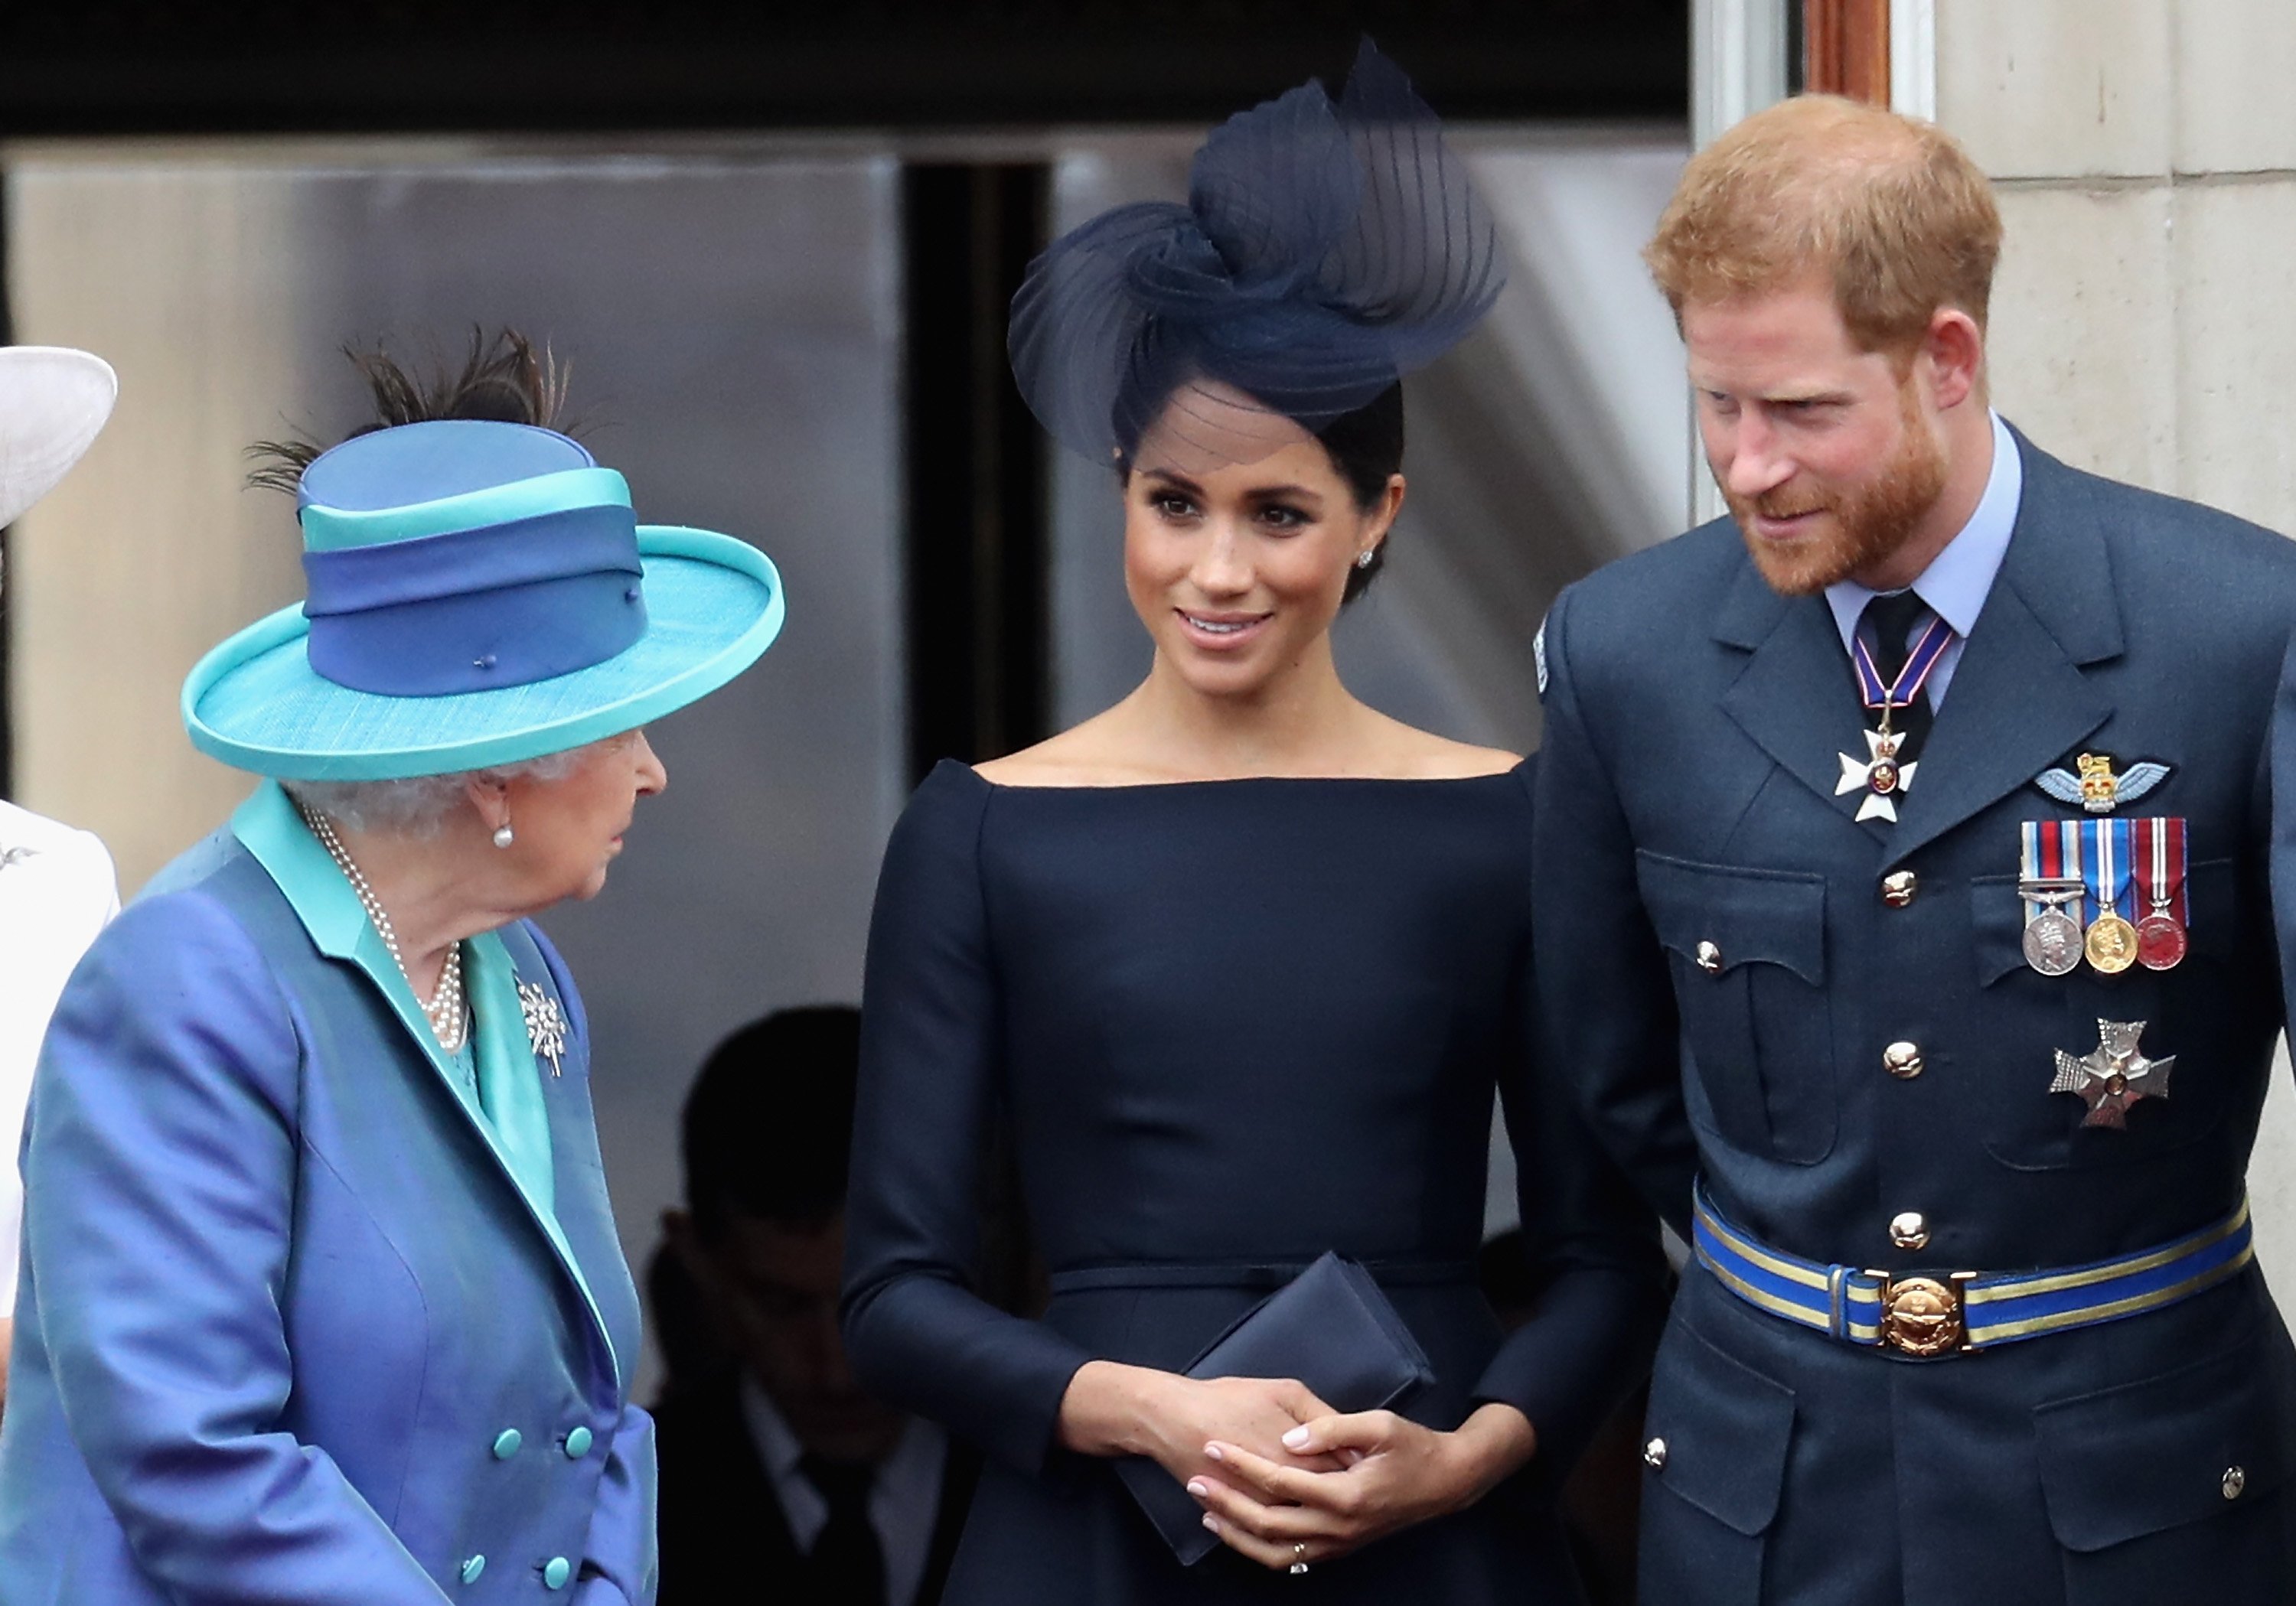 Queen Elizabeth II, Meghan, Duchess of Sussex, Prince Harry, Duke of Sussex pictured watching the RAF flypast on the balcony of Buckingham Palace on July 10, 2018 in London, England. / Source: Getty Images